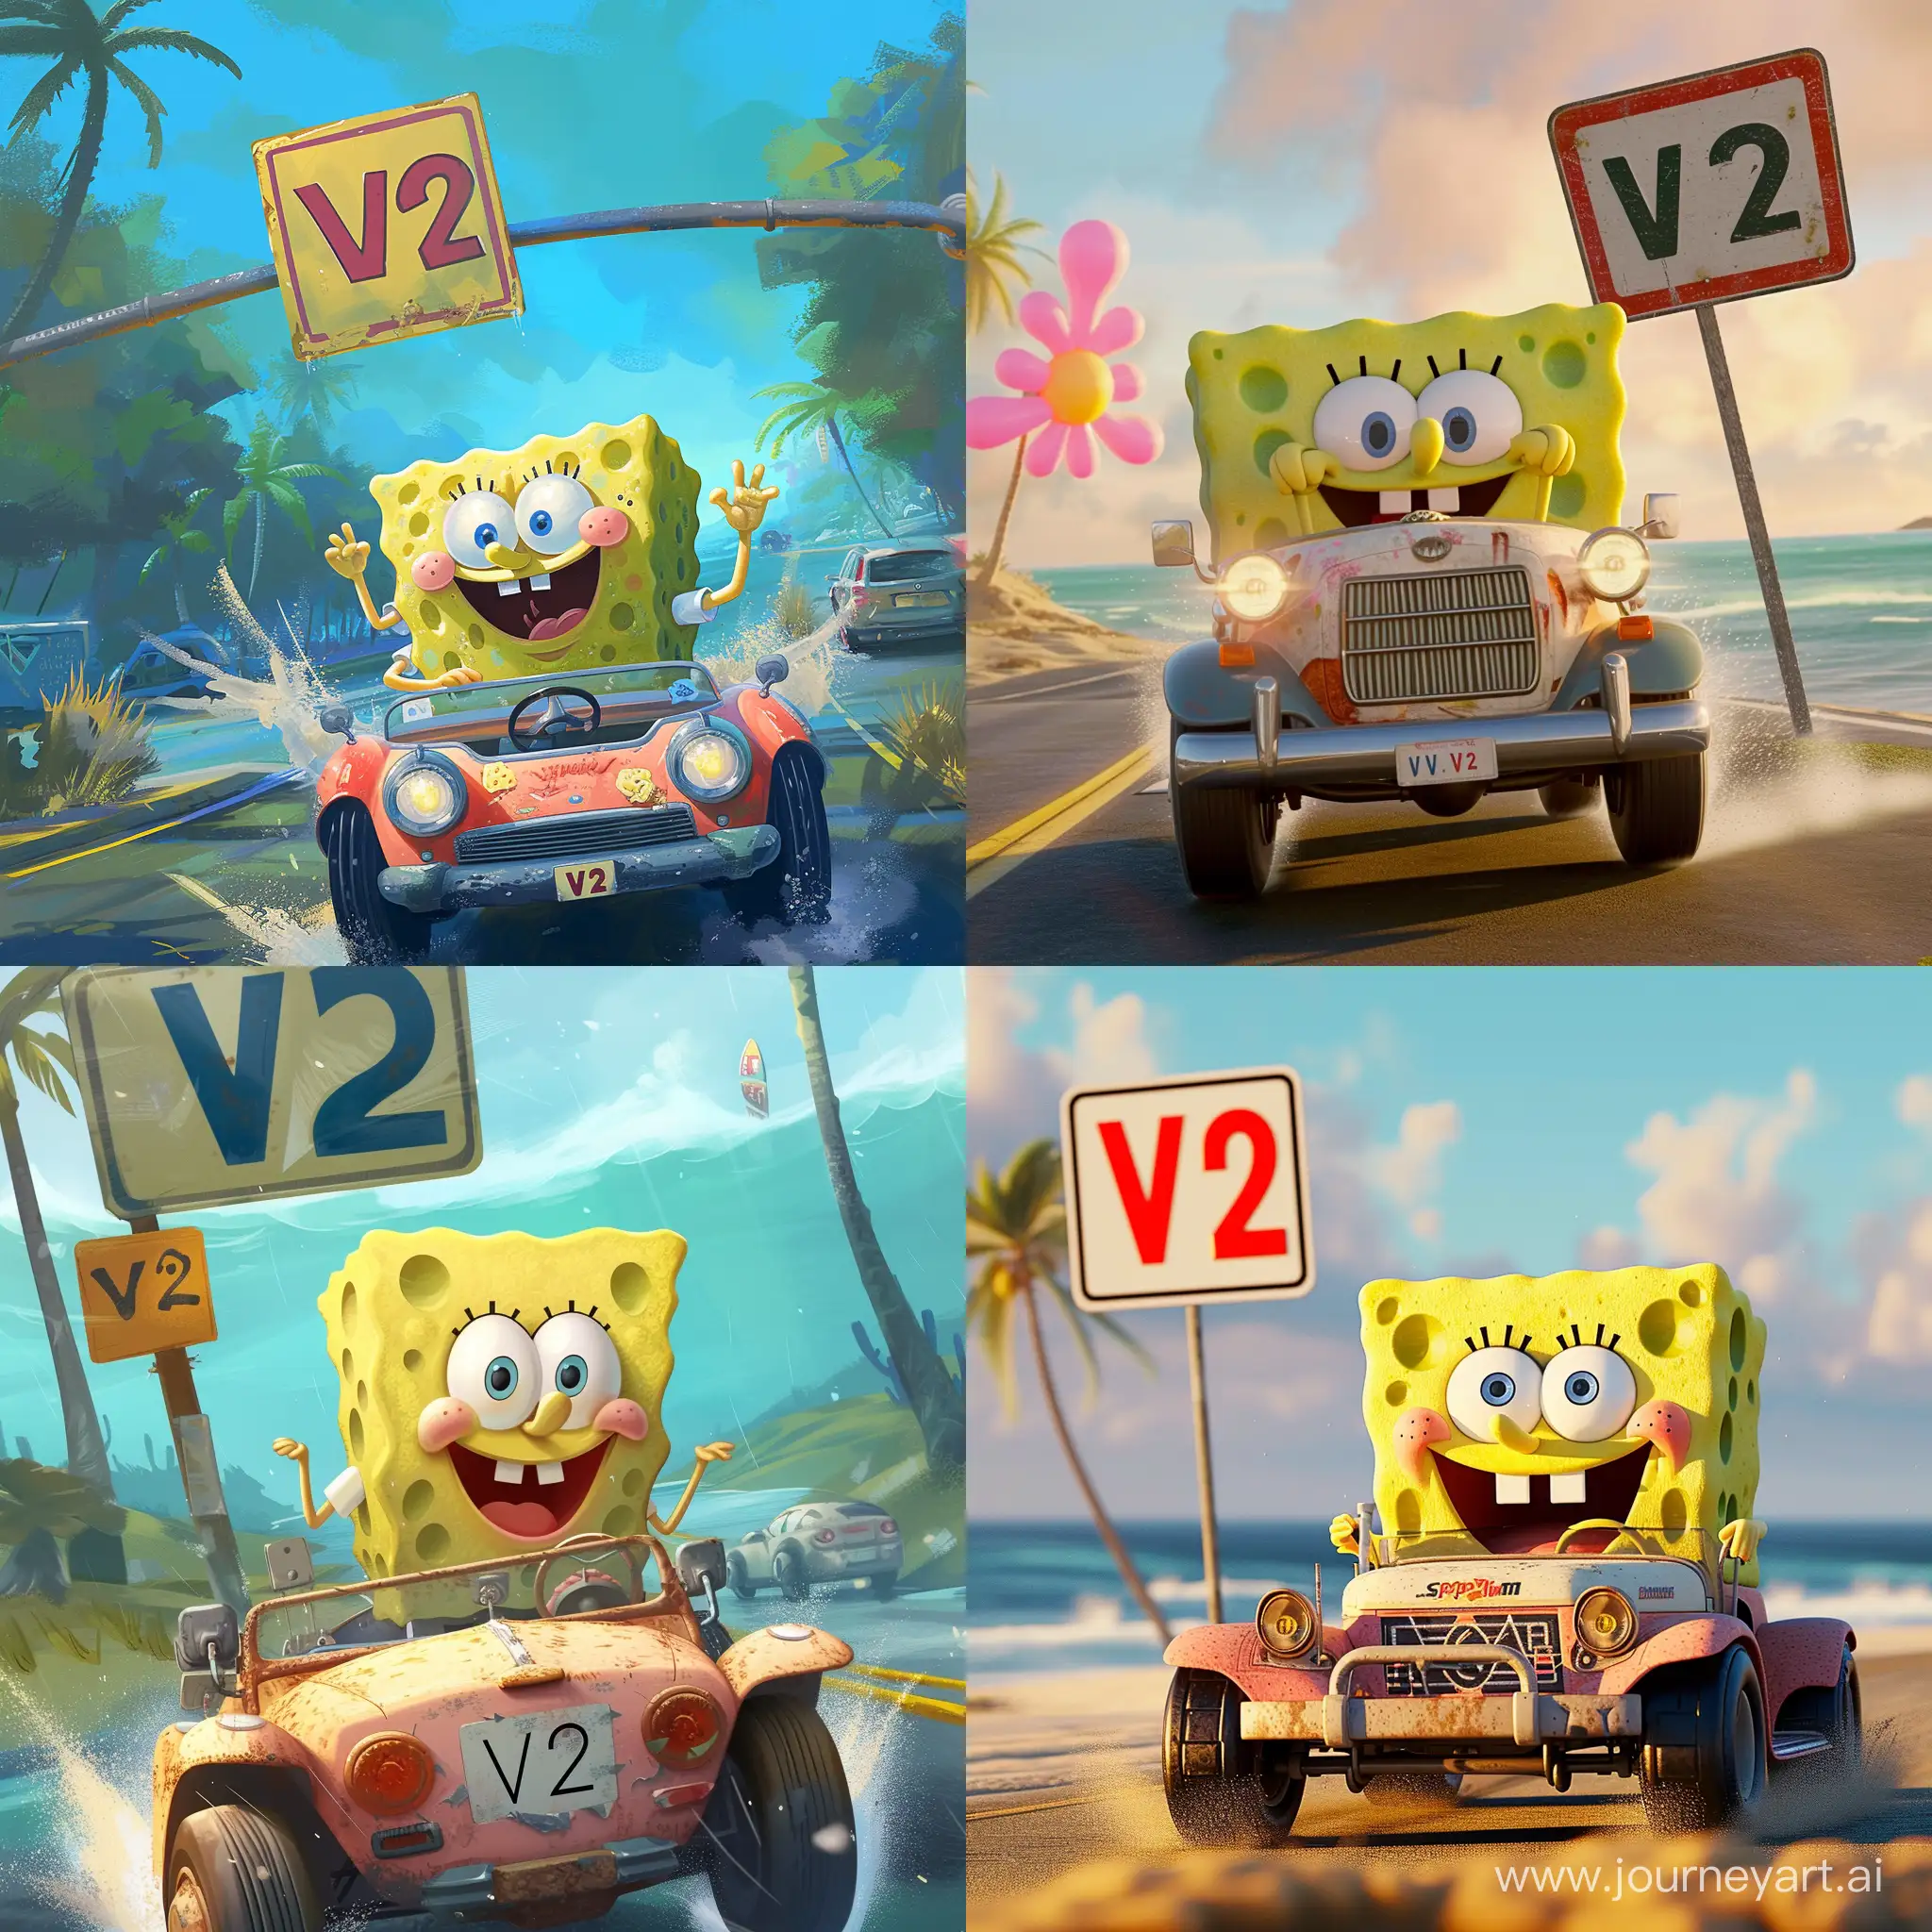 Single image of Spongebob driving in bikini bottom approaching a Signage that reads "V2"